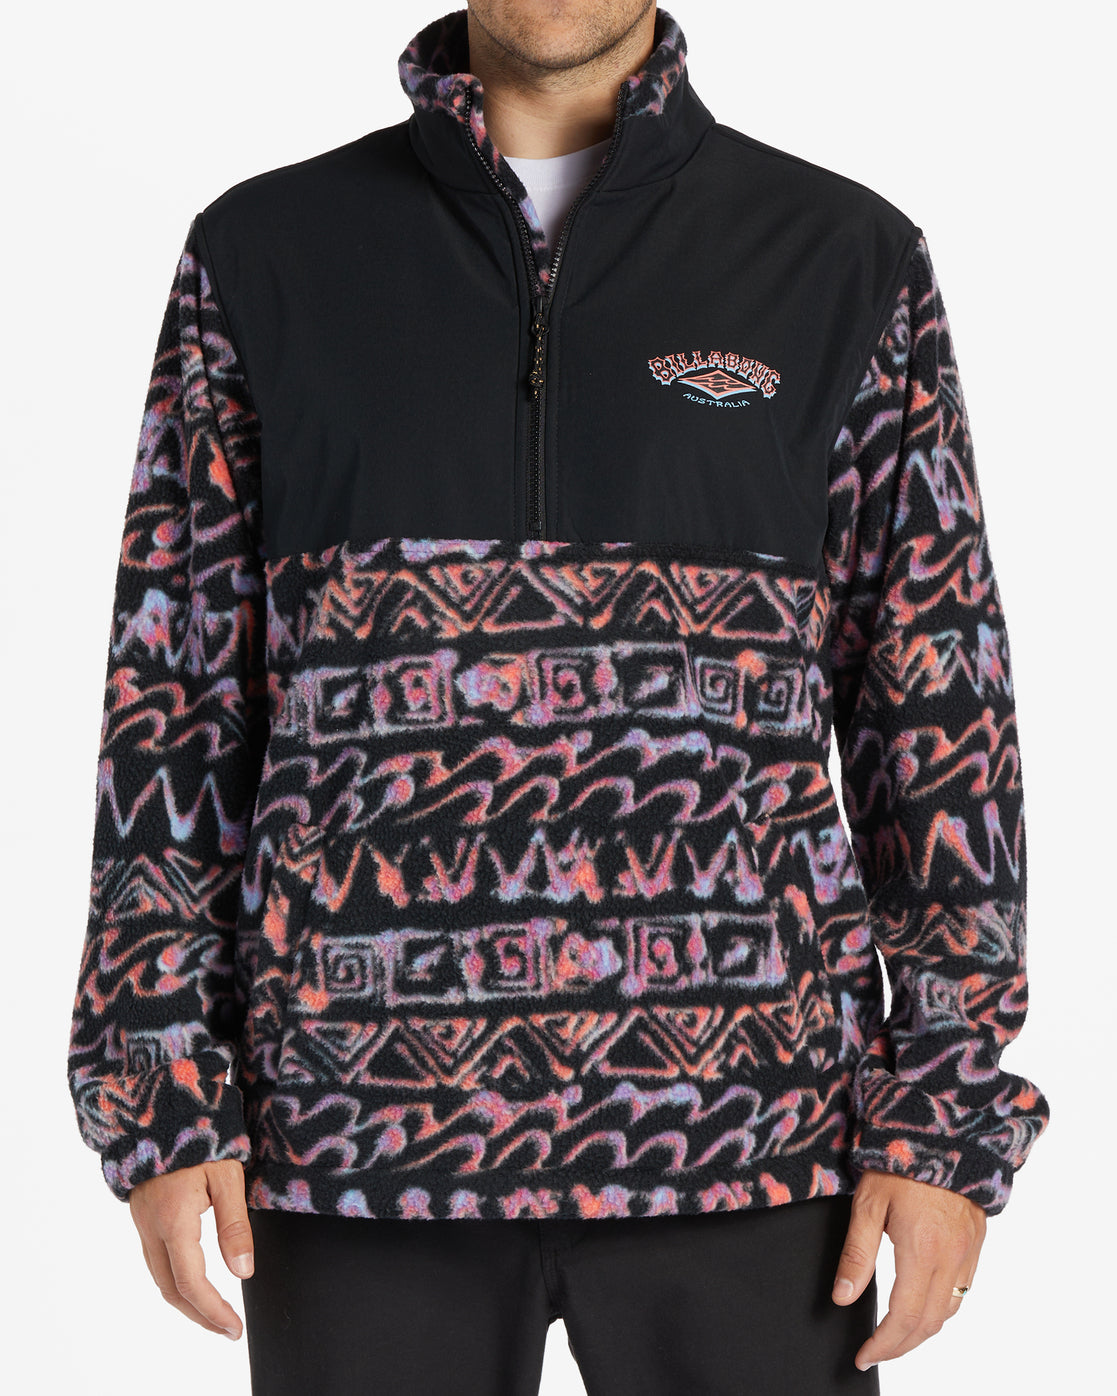 Billabong Boundary Re-Issue Crew Fleece in black and multi coloured from front